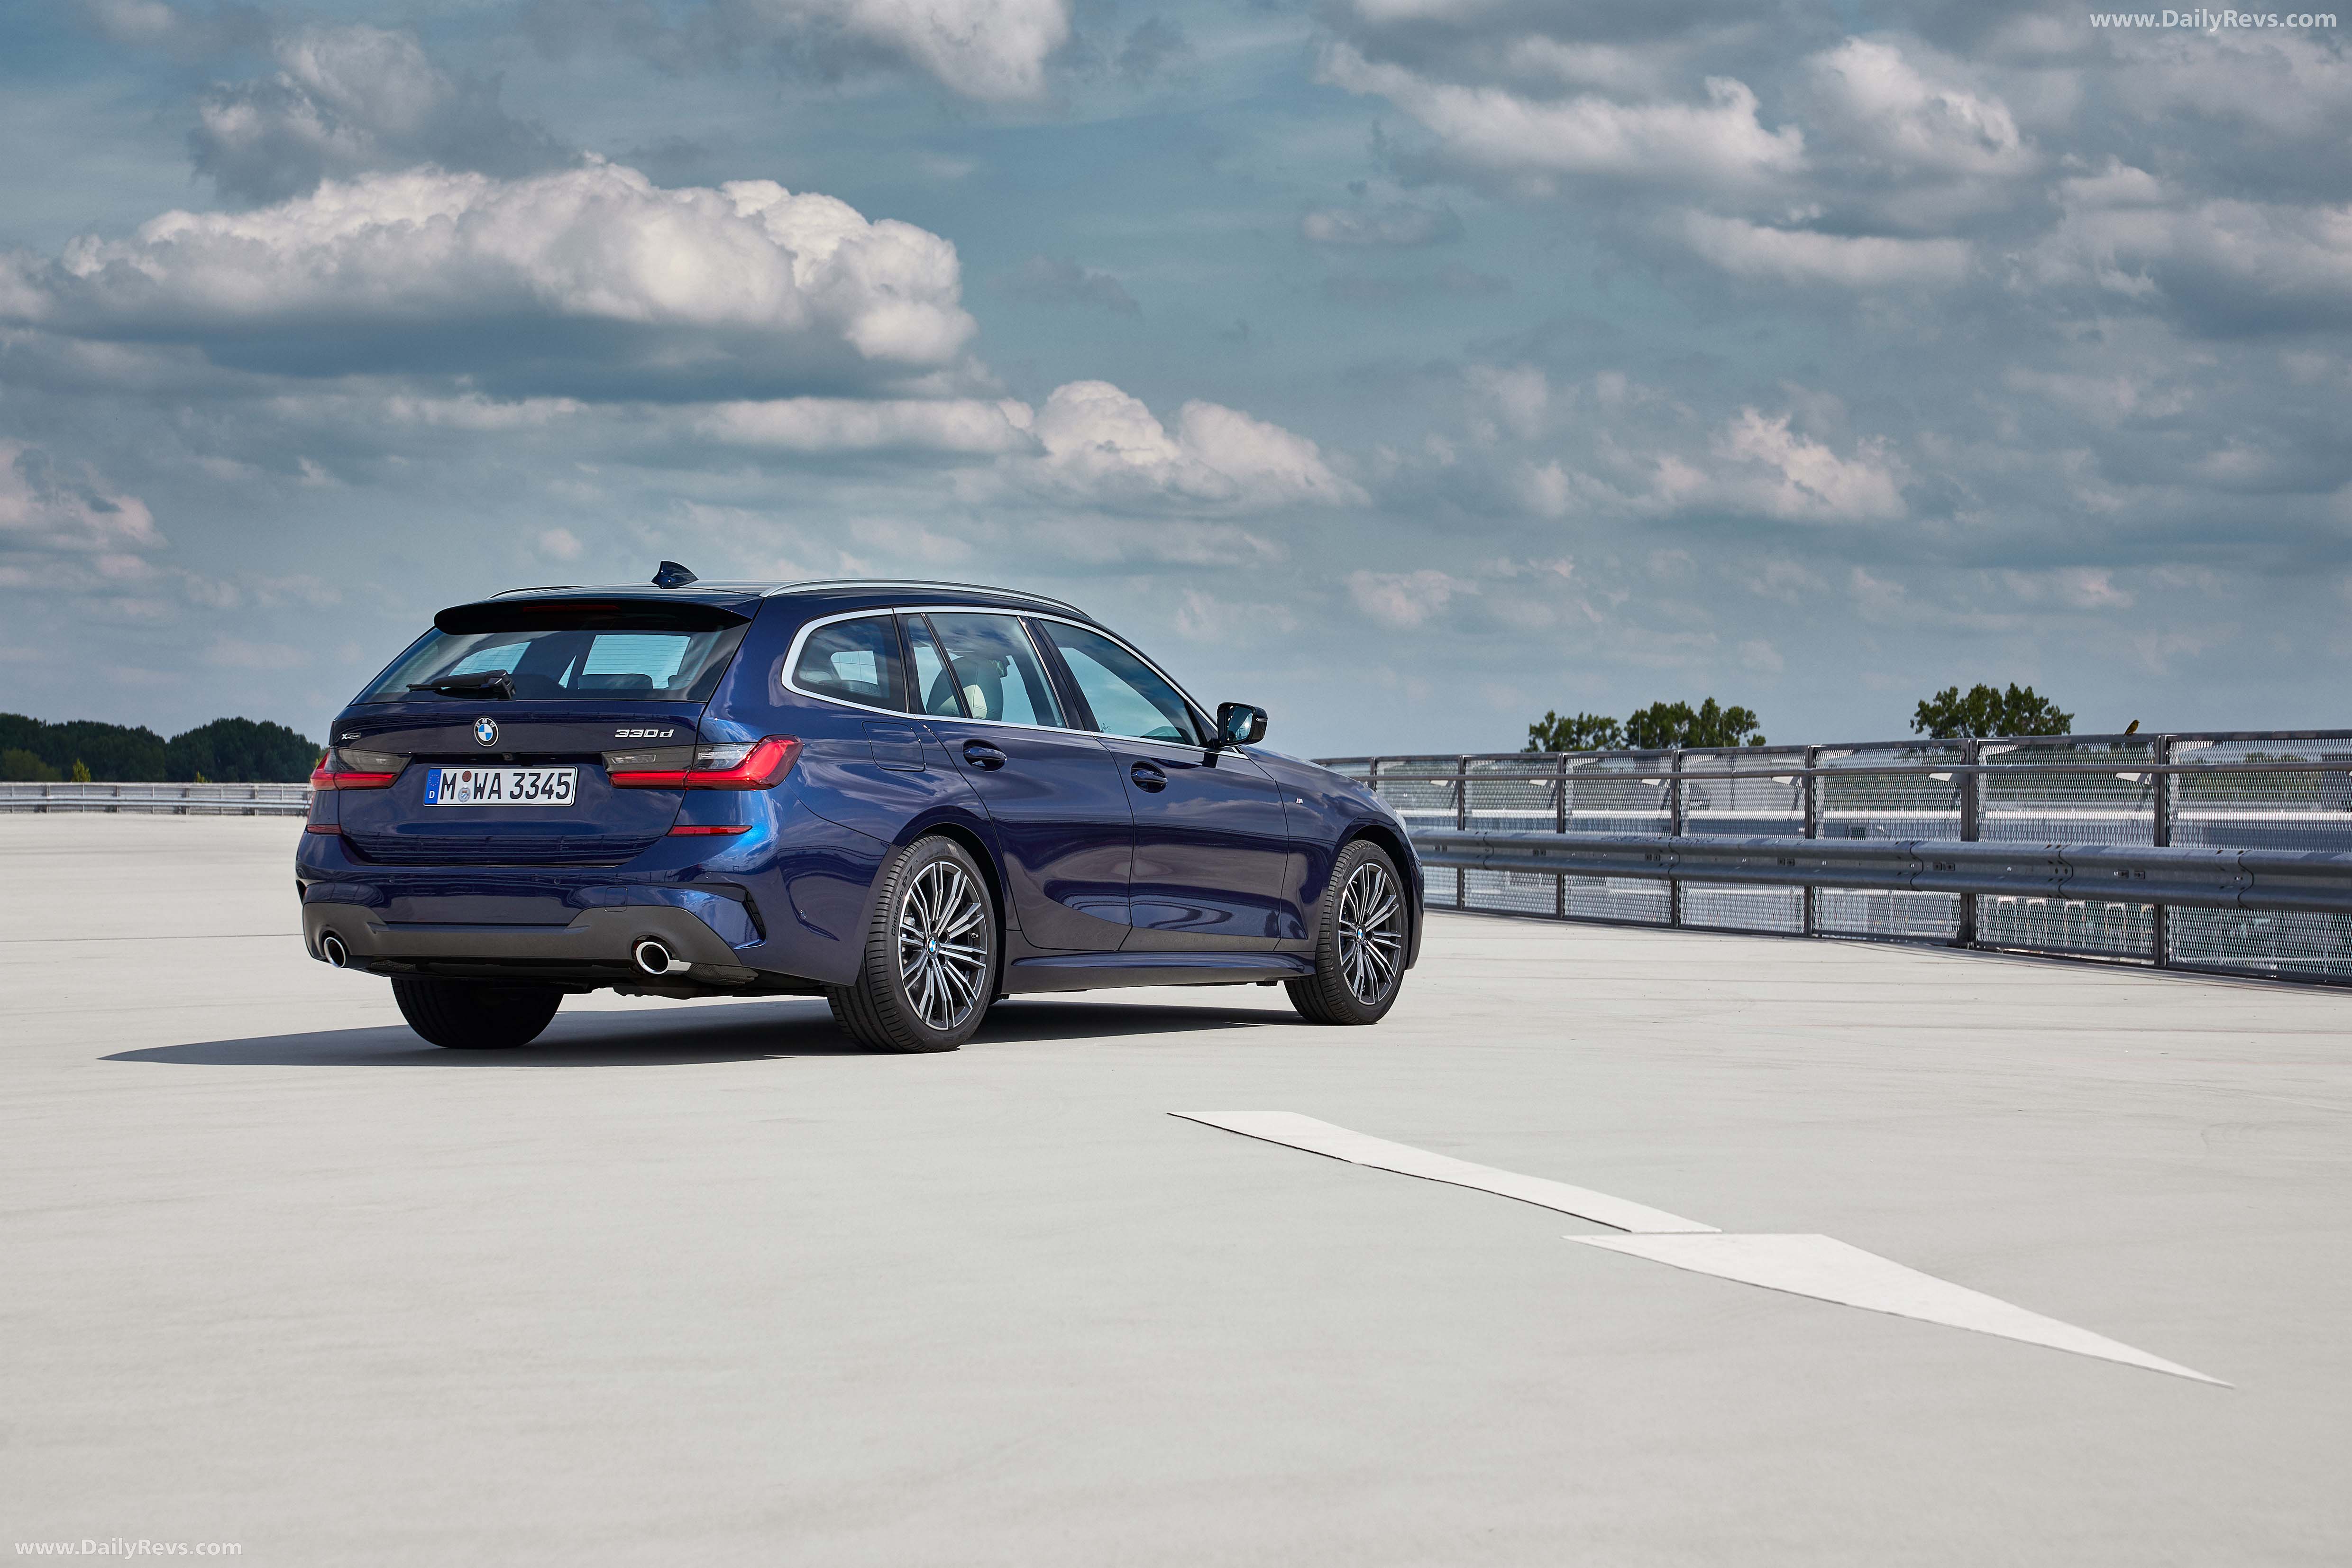 BMW 3 Series Touring (G21) wagon specifications